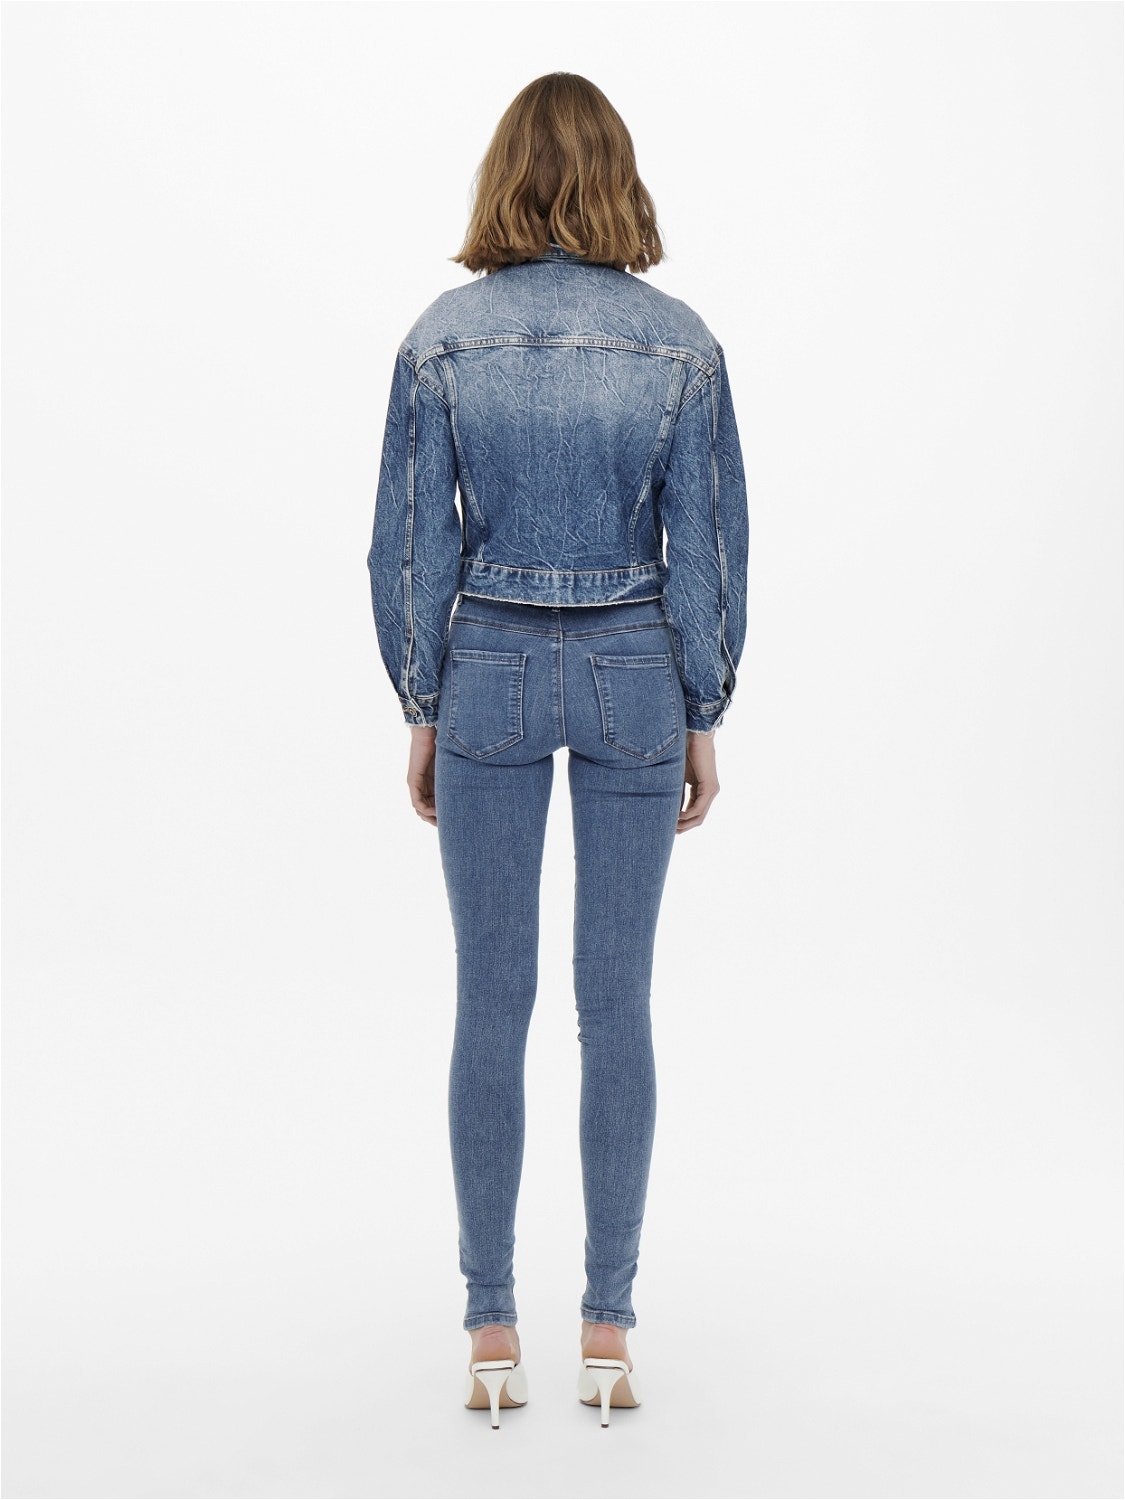 ONLY Jeans Skinny Fit Taille moyenne -Medium Blue Denim - 15129693